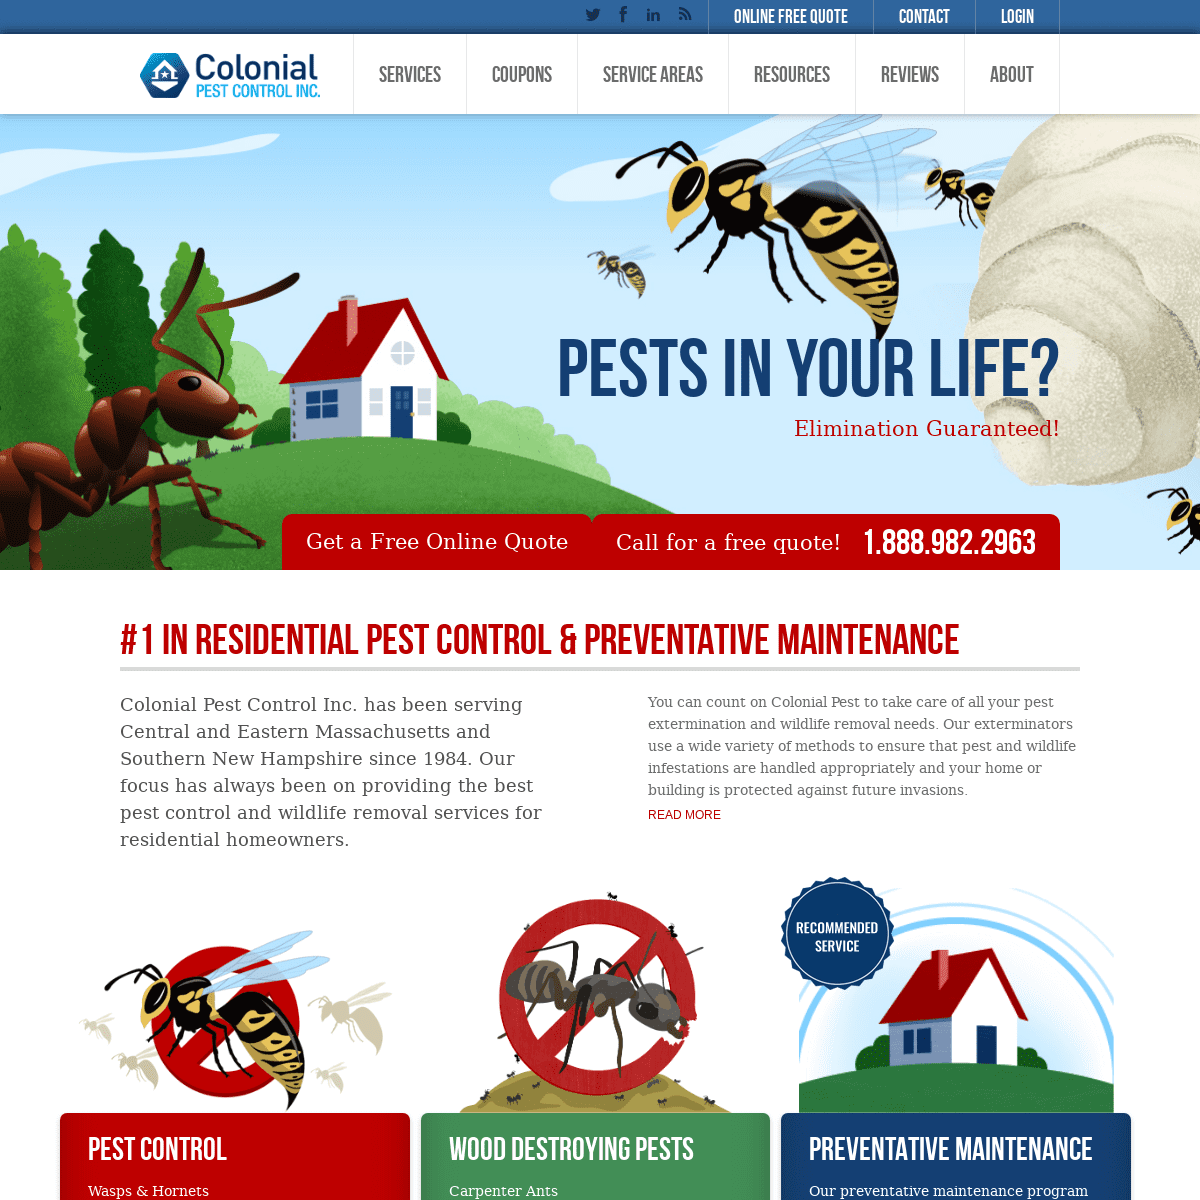 Colonial Pest Control - #1 in Residential Pest Control Services